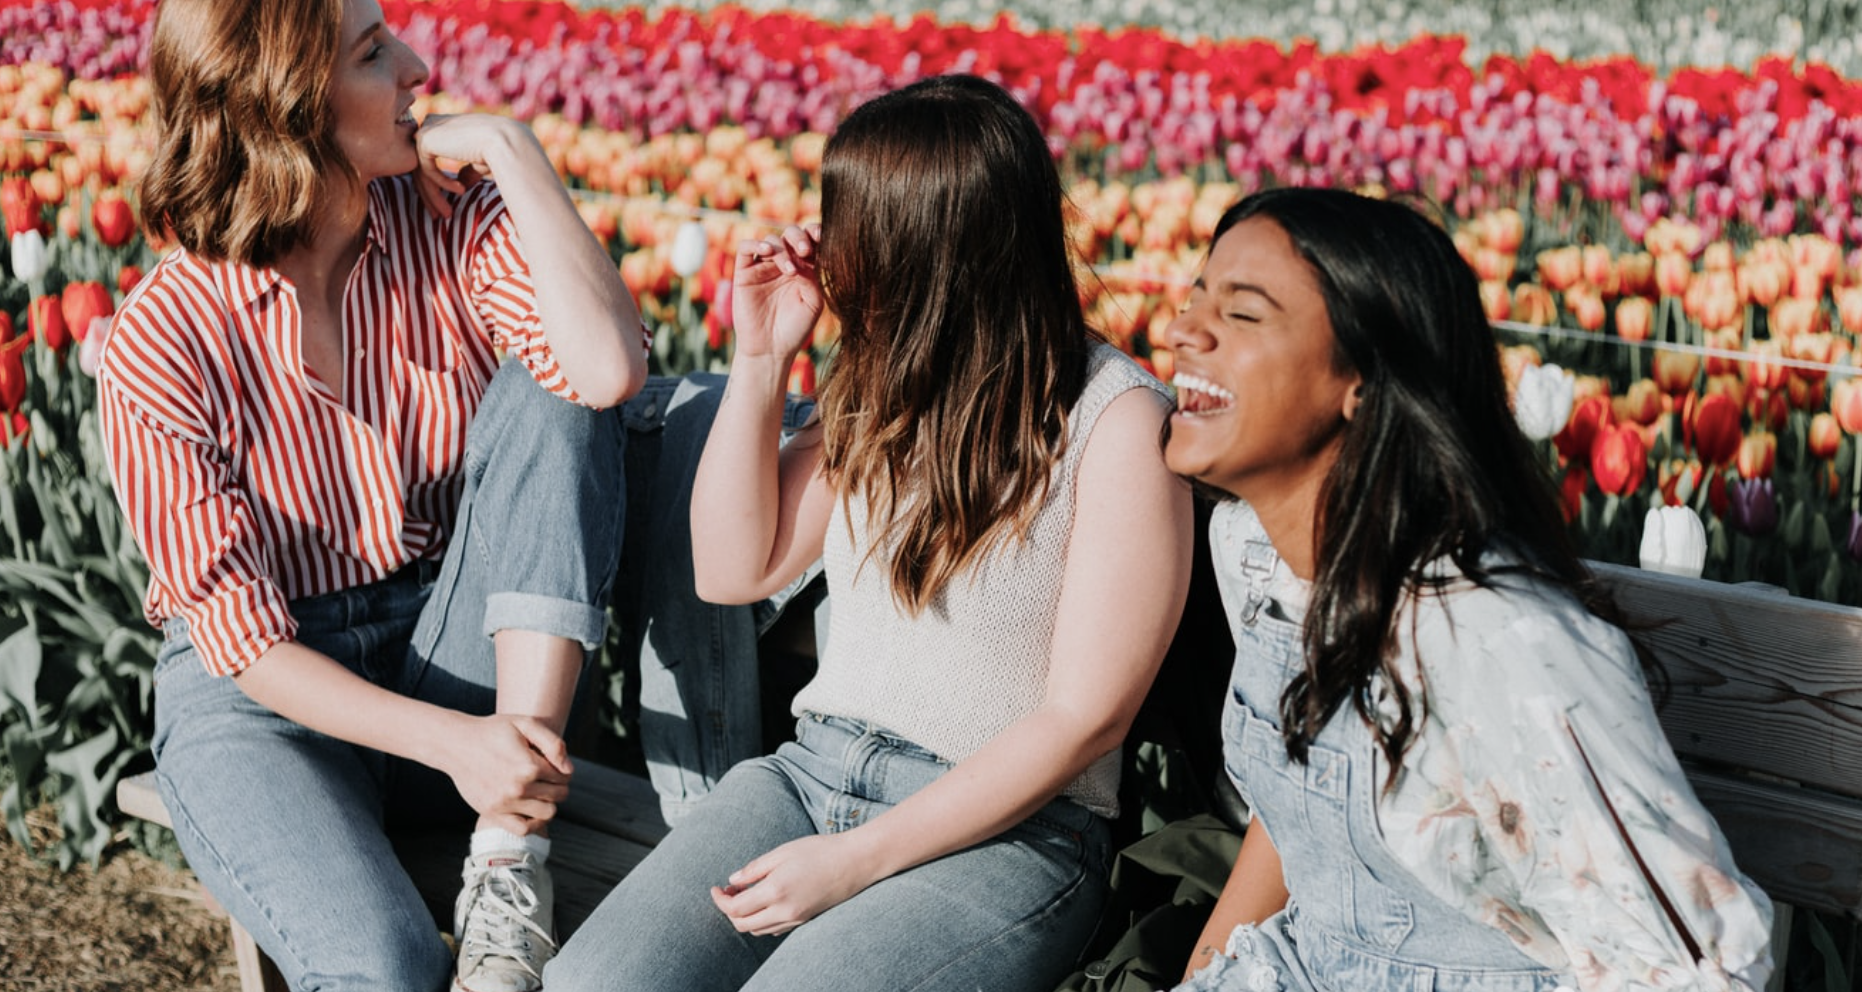 Three friends laughing together on a bench in a field of flowers